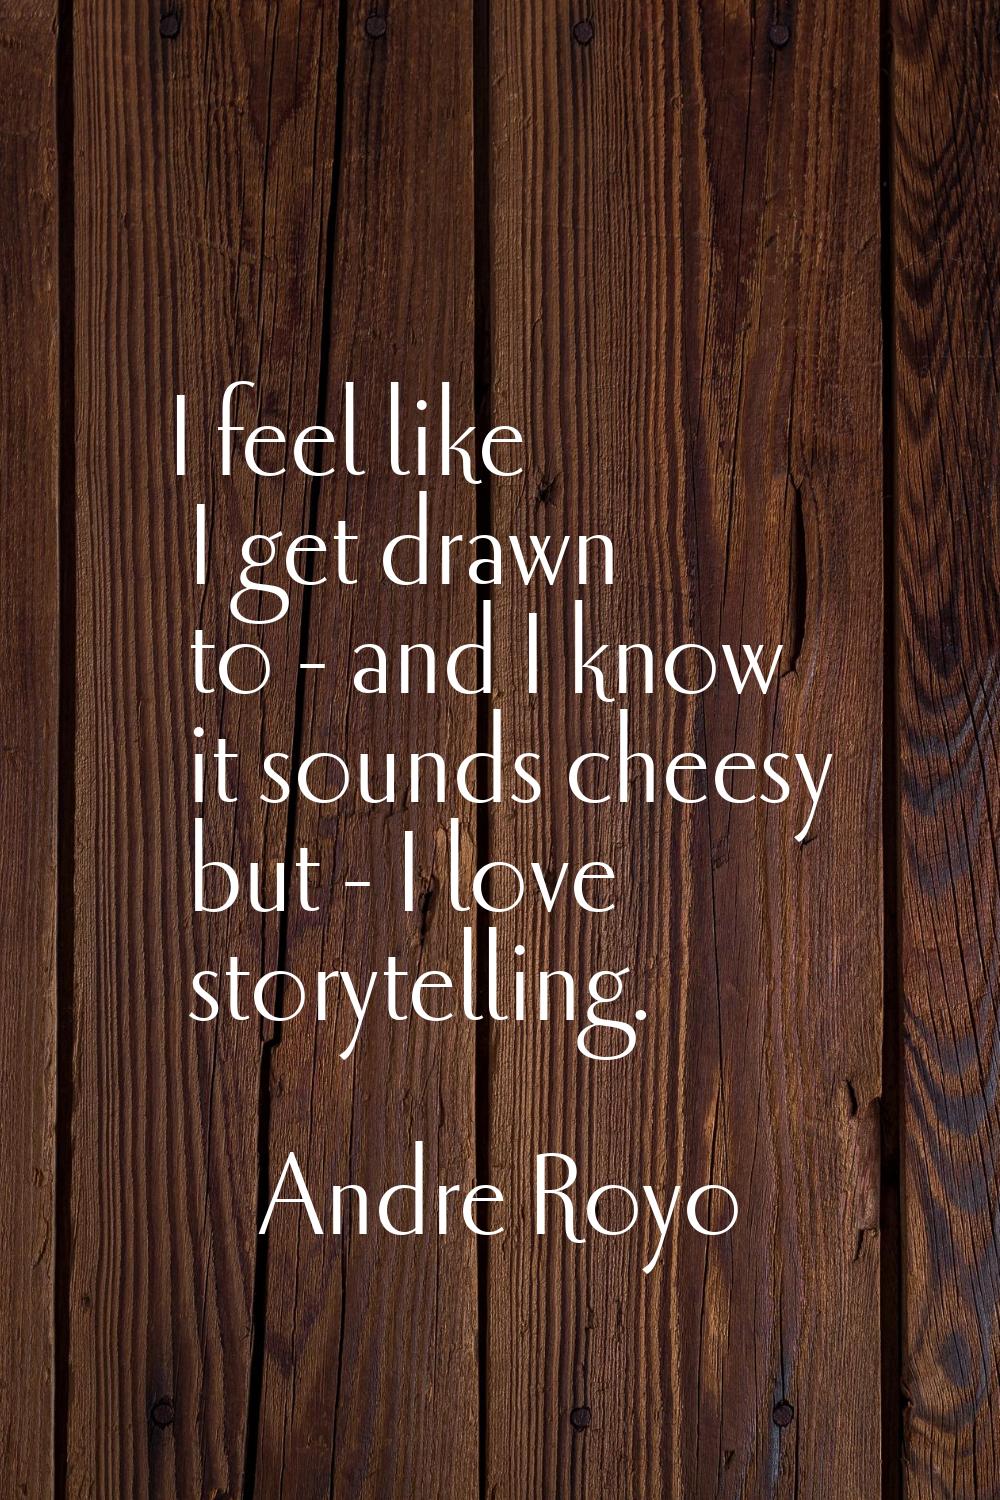 I feel like I get drawn to - and I know it sounds cheesy but - I love storytelling.